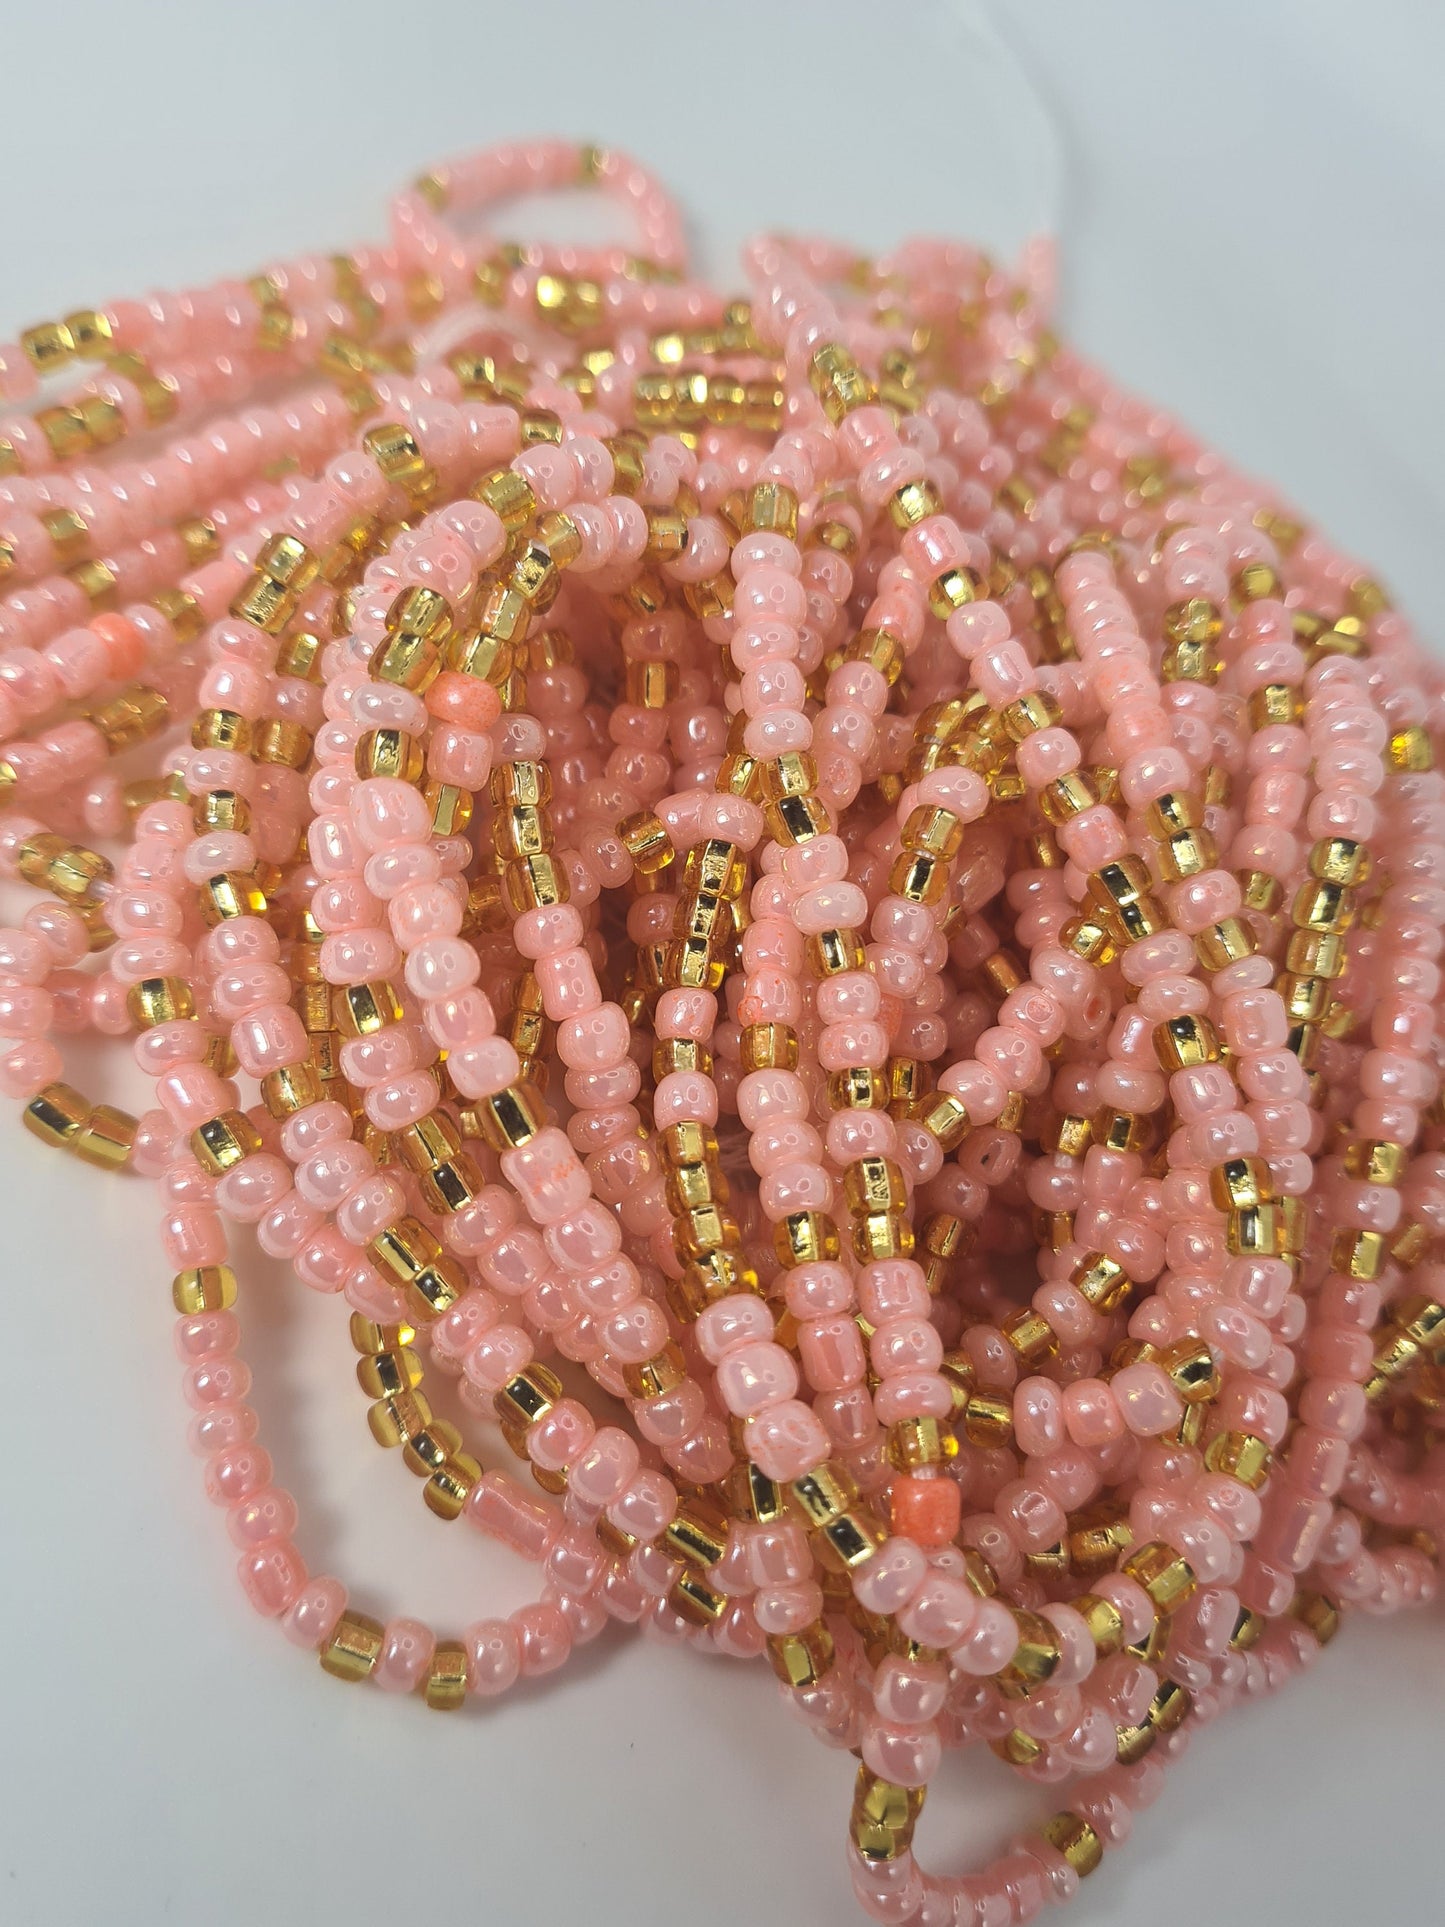 Peach and Gold Waist Beads|On Sale Belly Chain Weight control African beads|belly beads| Ghana beads| Weight Tracker| Nigerian waist beads